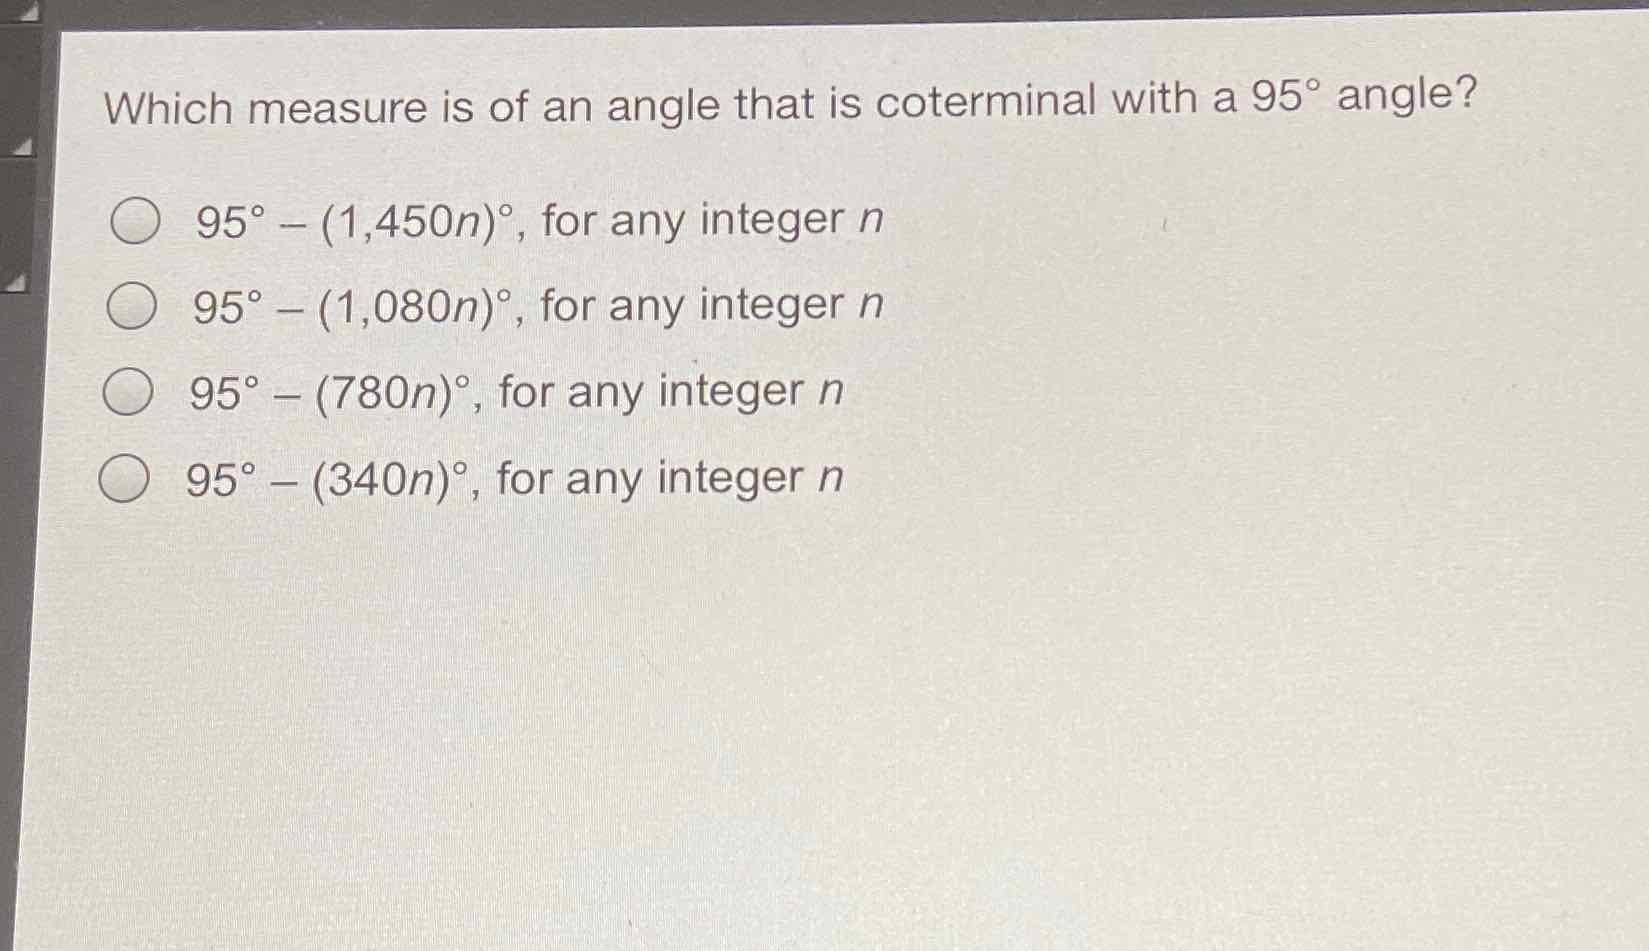 Which measure is of an angle that is coterminal with a \( 95^{\circ} \) angle?
\( 95^{\circ}-(1,450 n)^{\circ} \), for any integer \( n \)
\( 95^{\circ}-(1,080 n)^{\circ} \), for any integer \( n \)
\( 95^{\circ}-(780 n)^{\circ} \), for any integer \( n \)
\( 95^{\circ}-(340 n)^{\circ} \), for any integer \( n \)